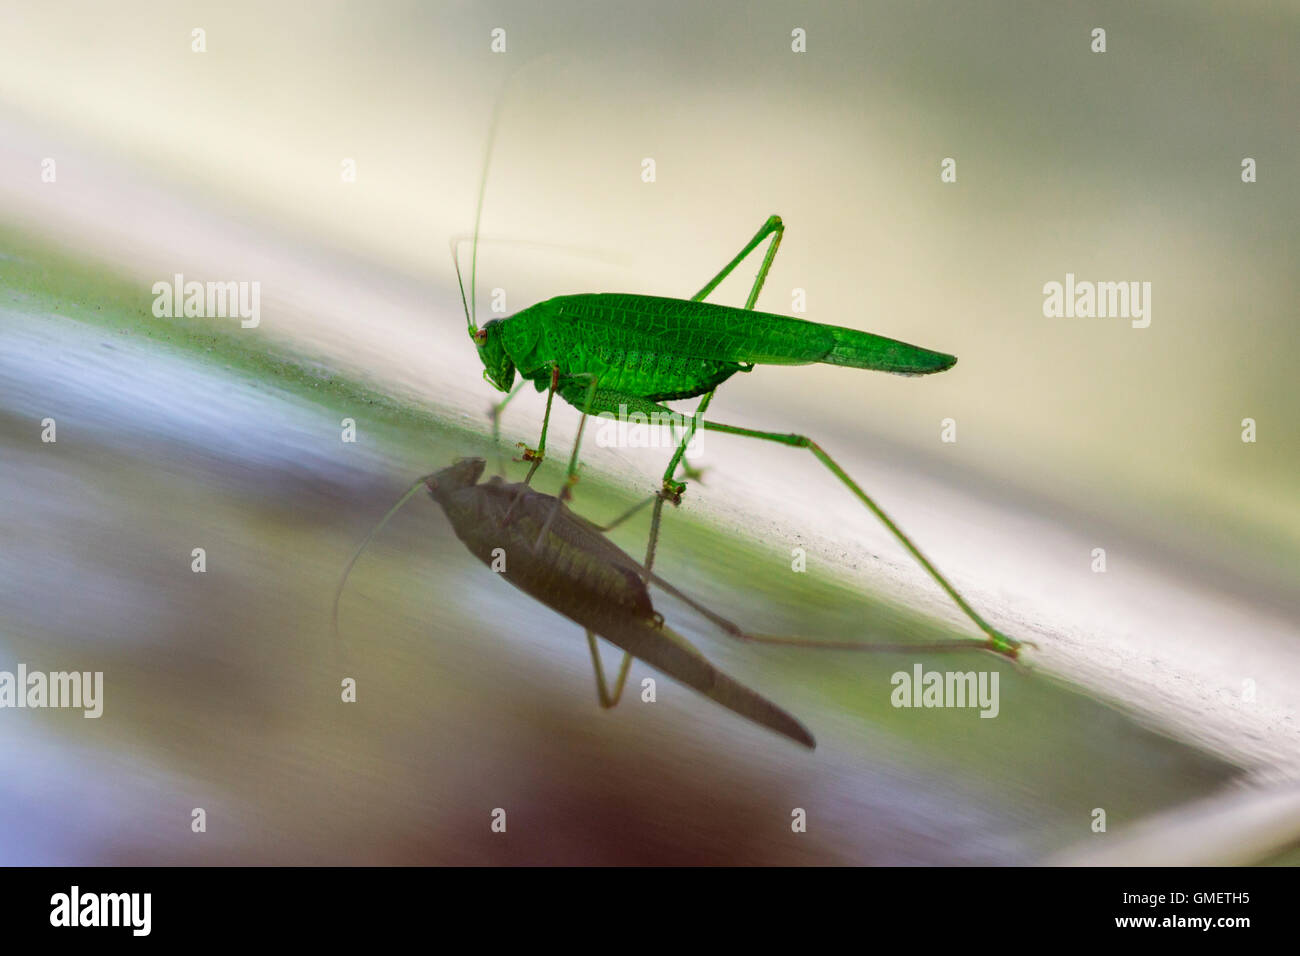 Green grasshopper reflects in glossy surface Stock Photo